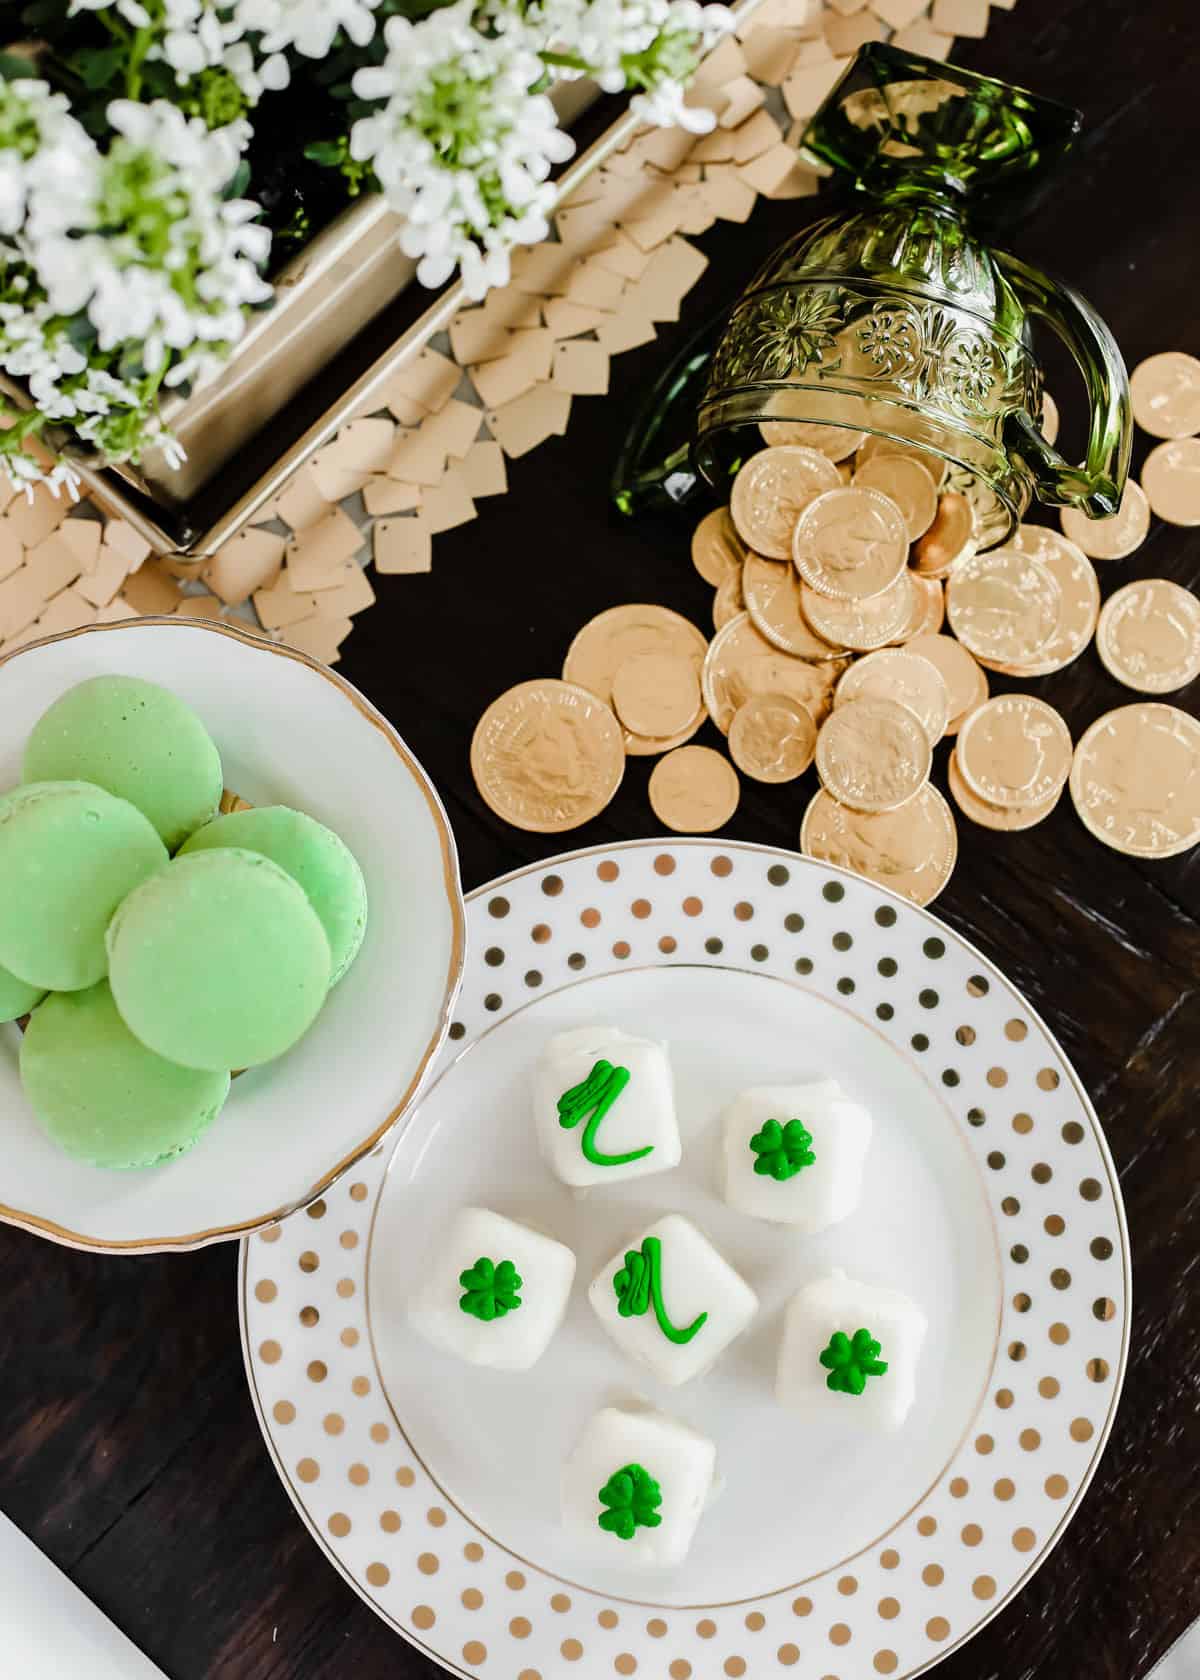 overhead view of green macarons and shamrock themed petit fours on white plates with gold coins on table.